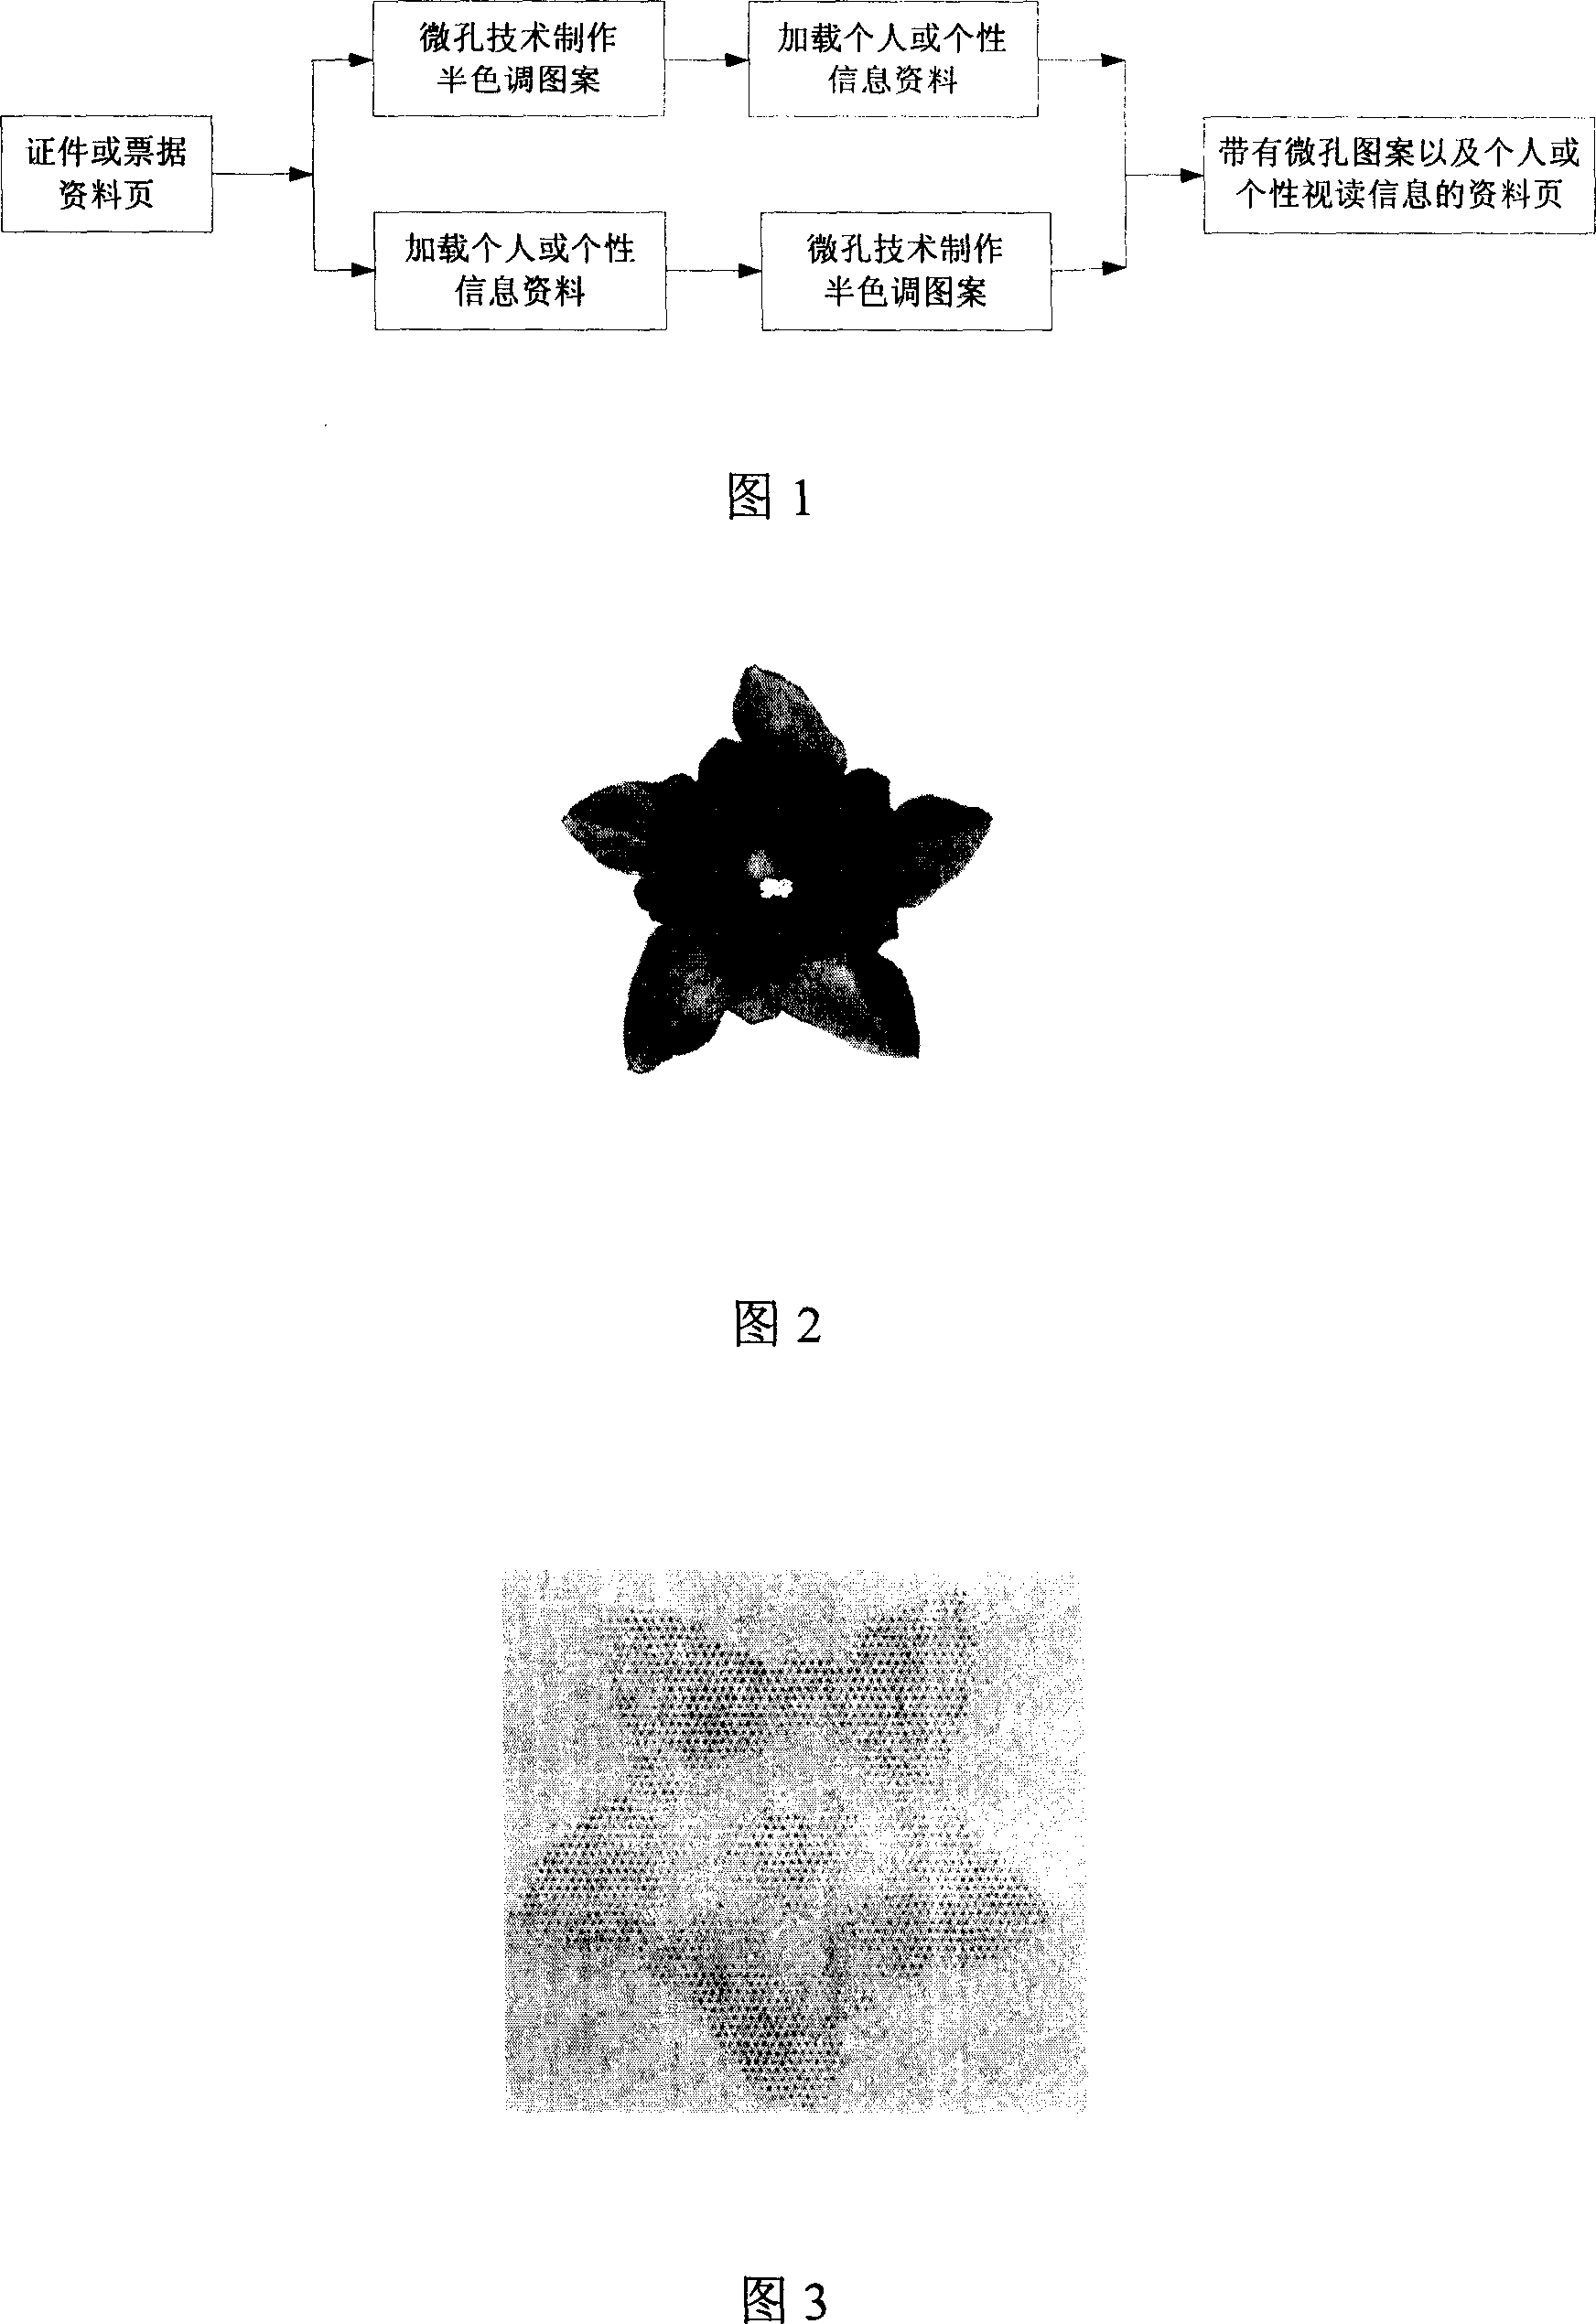 Method for personal or personalized video reading information loading protection for certifate and bill